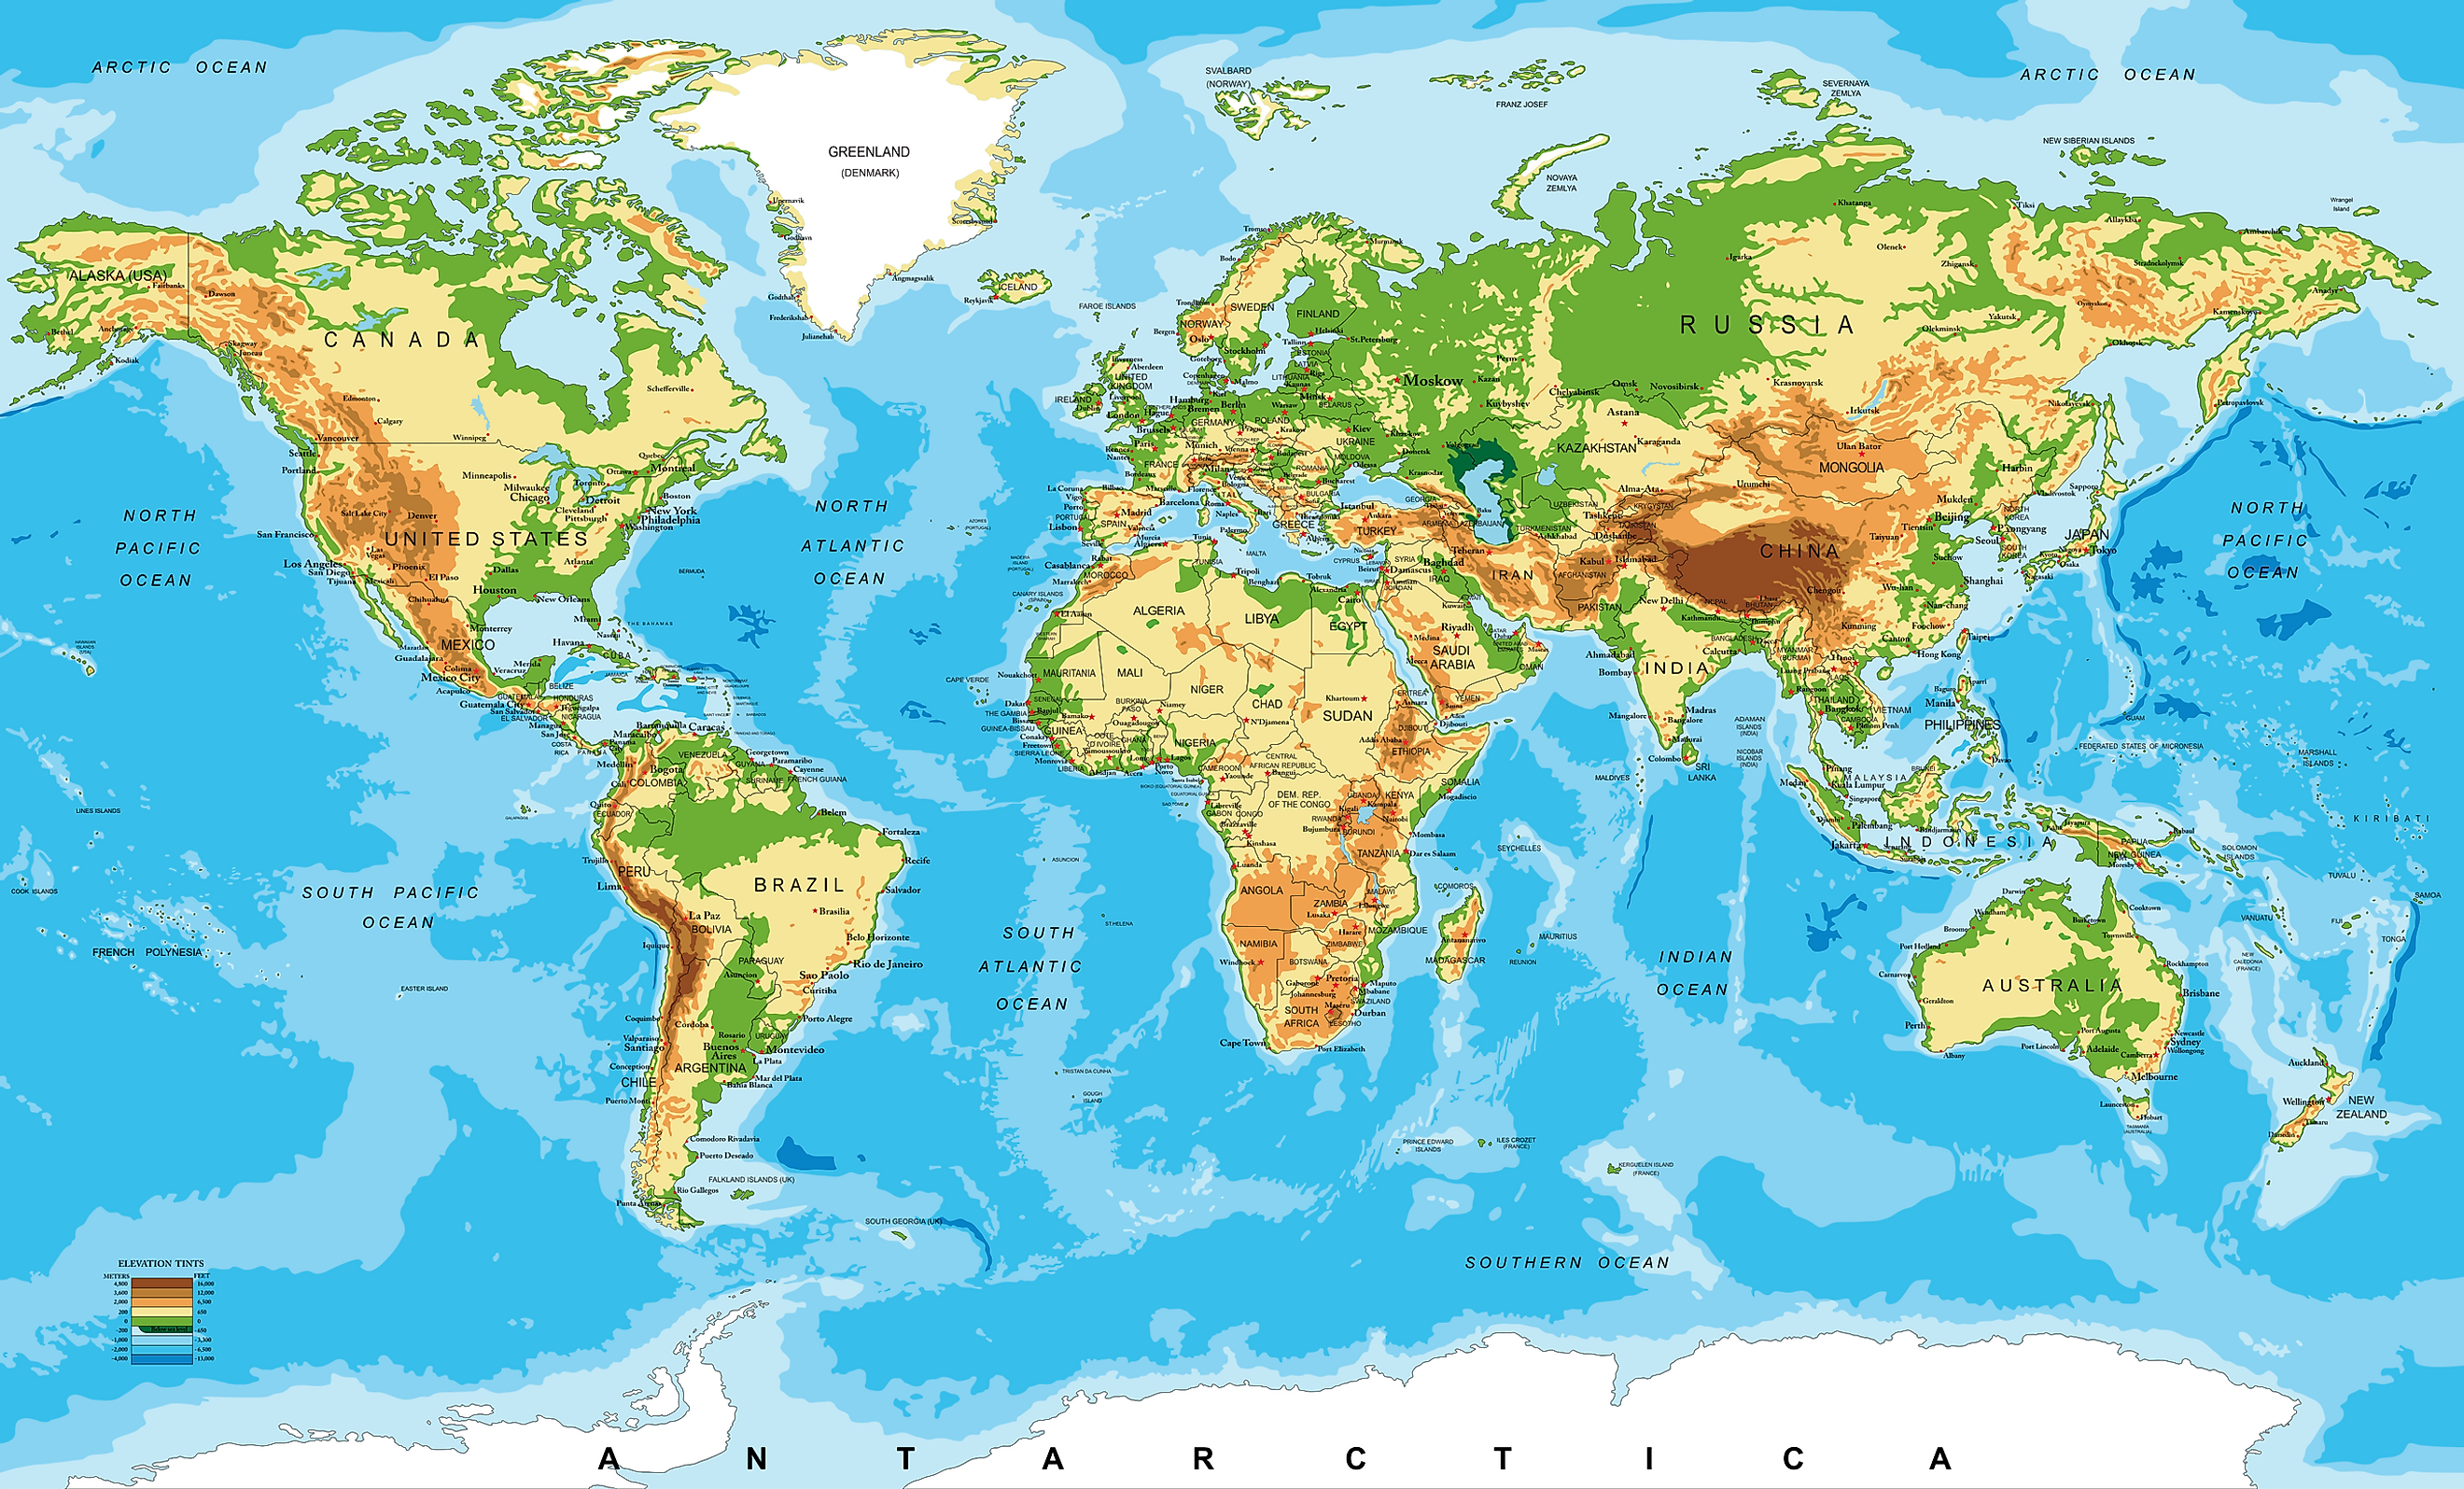 world map mountain ranges and deserts